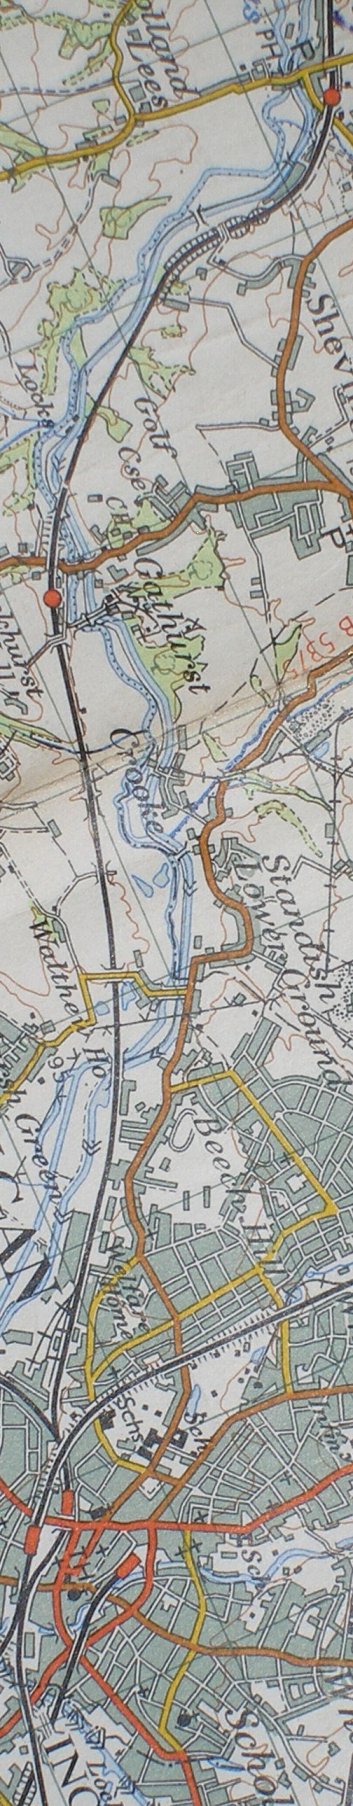 Section from the Ordnance Survey map 1961 showing L&YR railway line from Gathurst to Wigan railway station